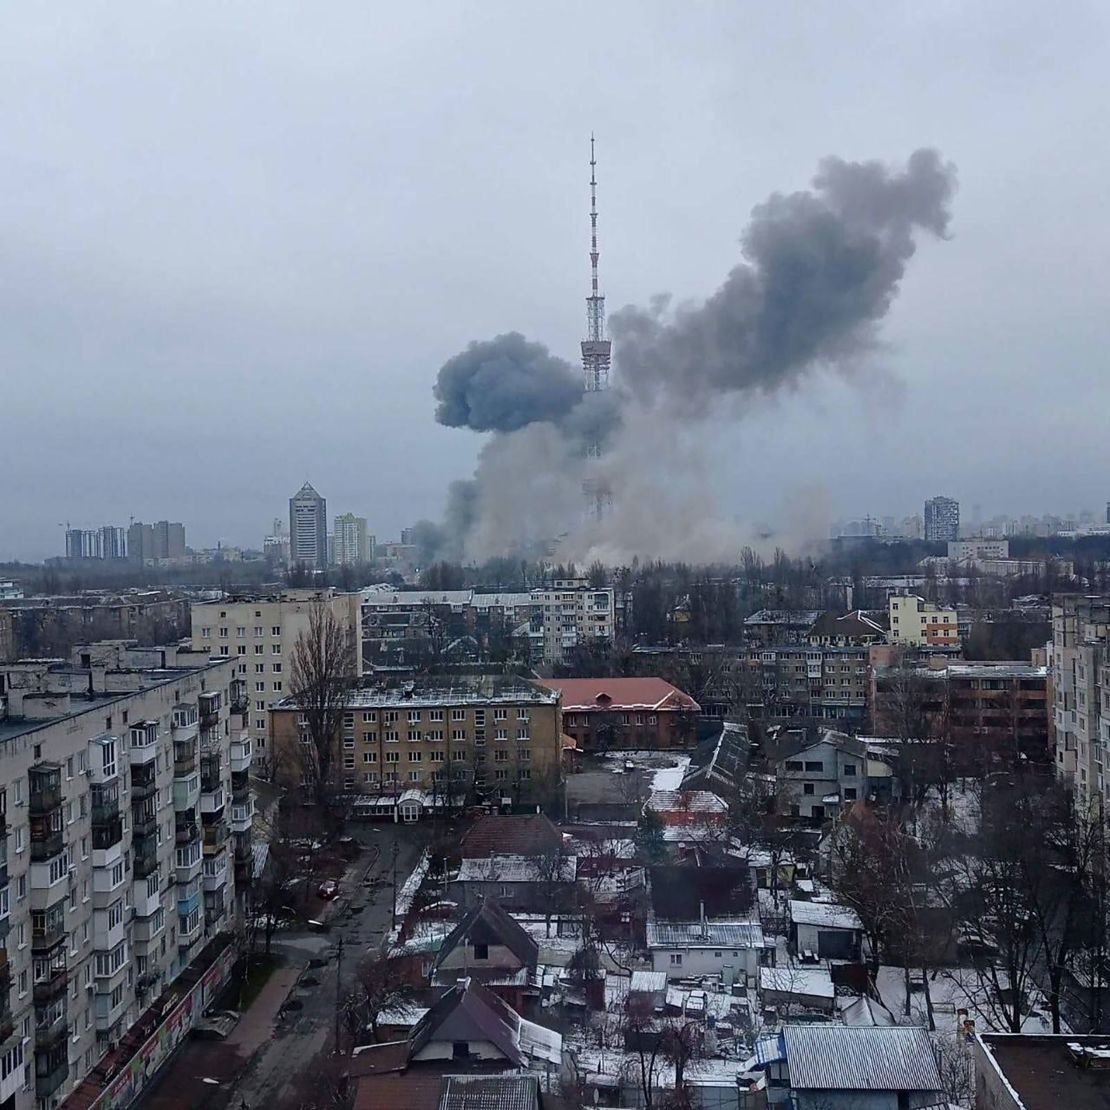 The area surrounding a massive TV tower in Kyiv after being hit by military strikes on Tuesday.